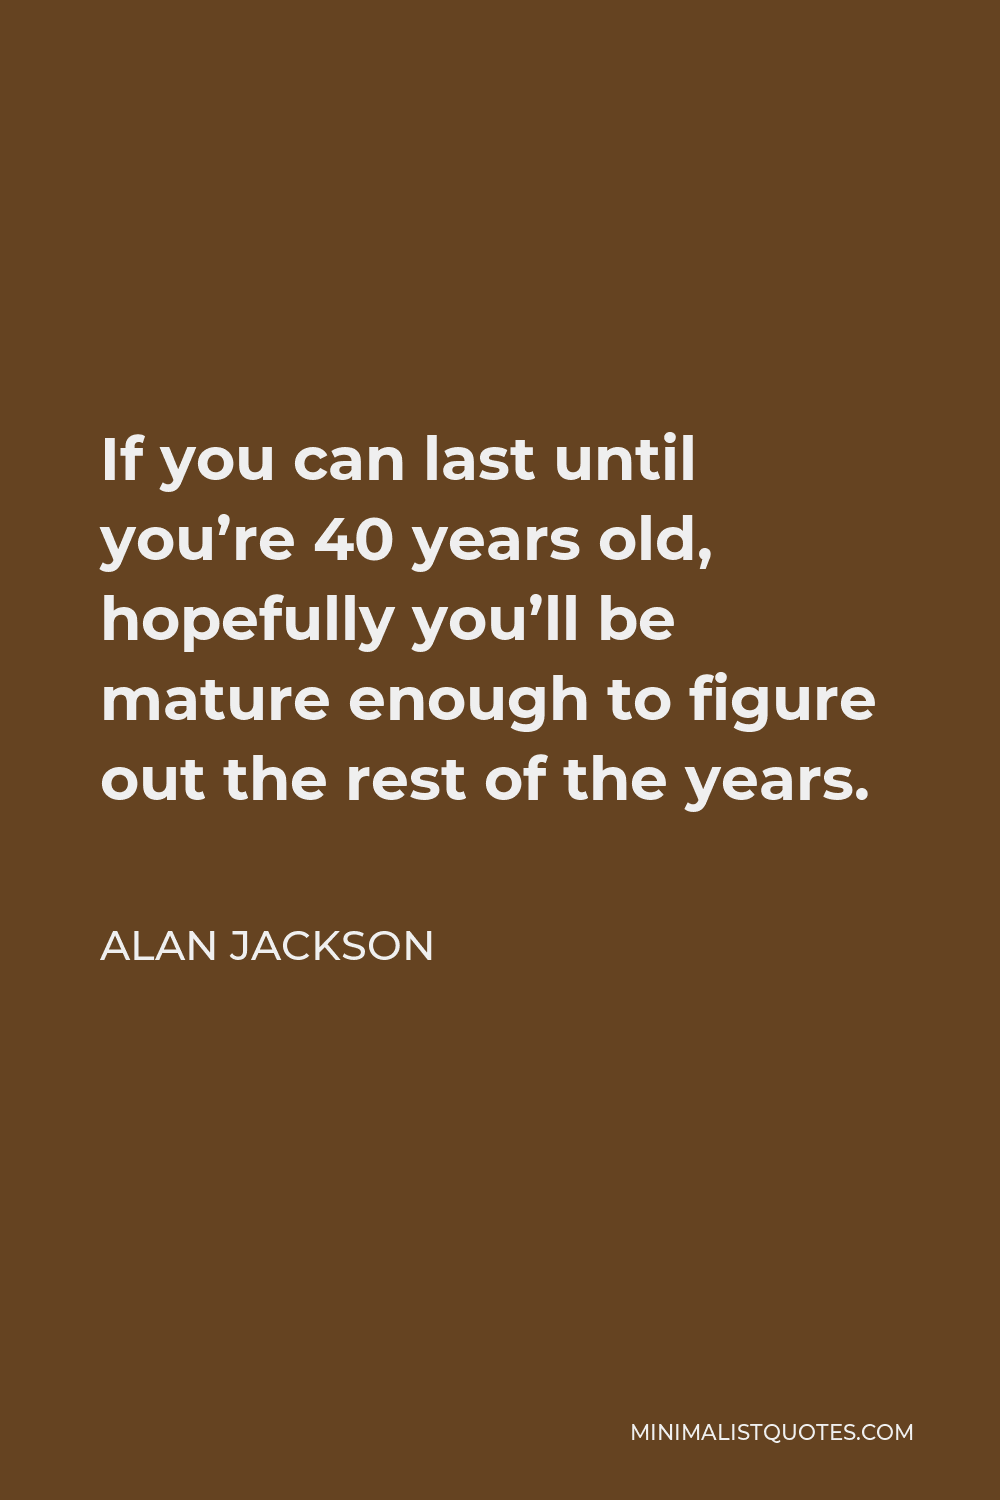 Alan Jackson Quote - If you can last until you’re 40 years old, hopefully you’ll be mature enough to figure out the rest of the years.